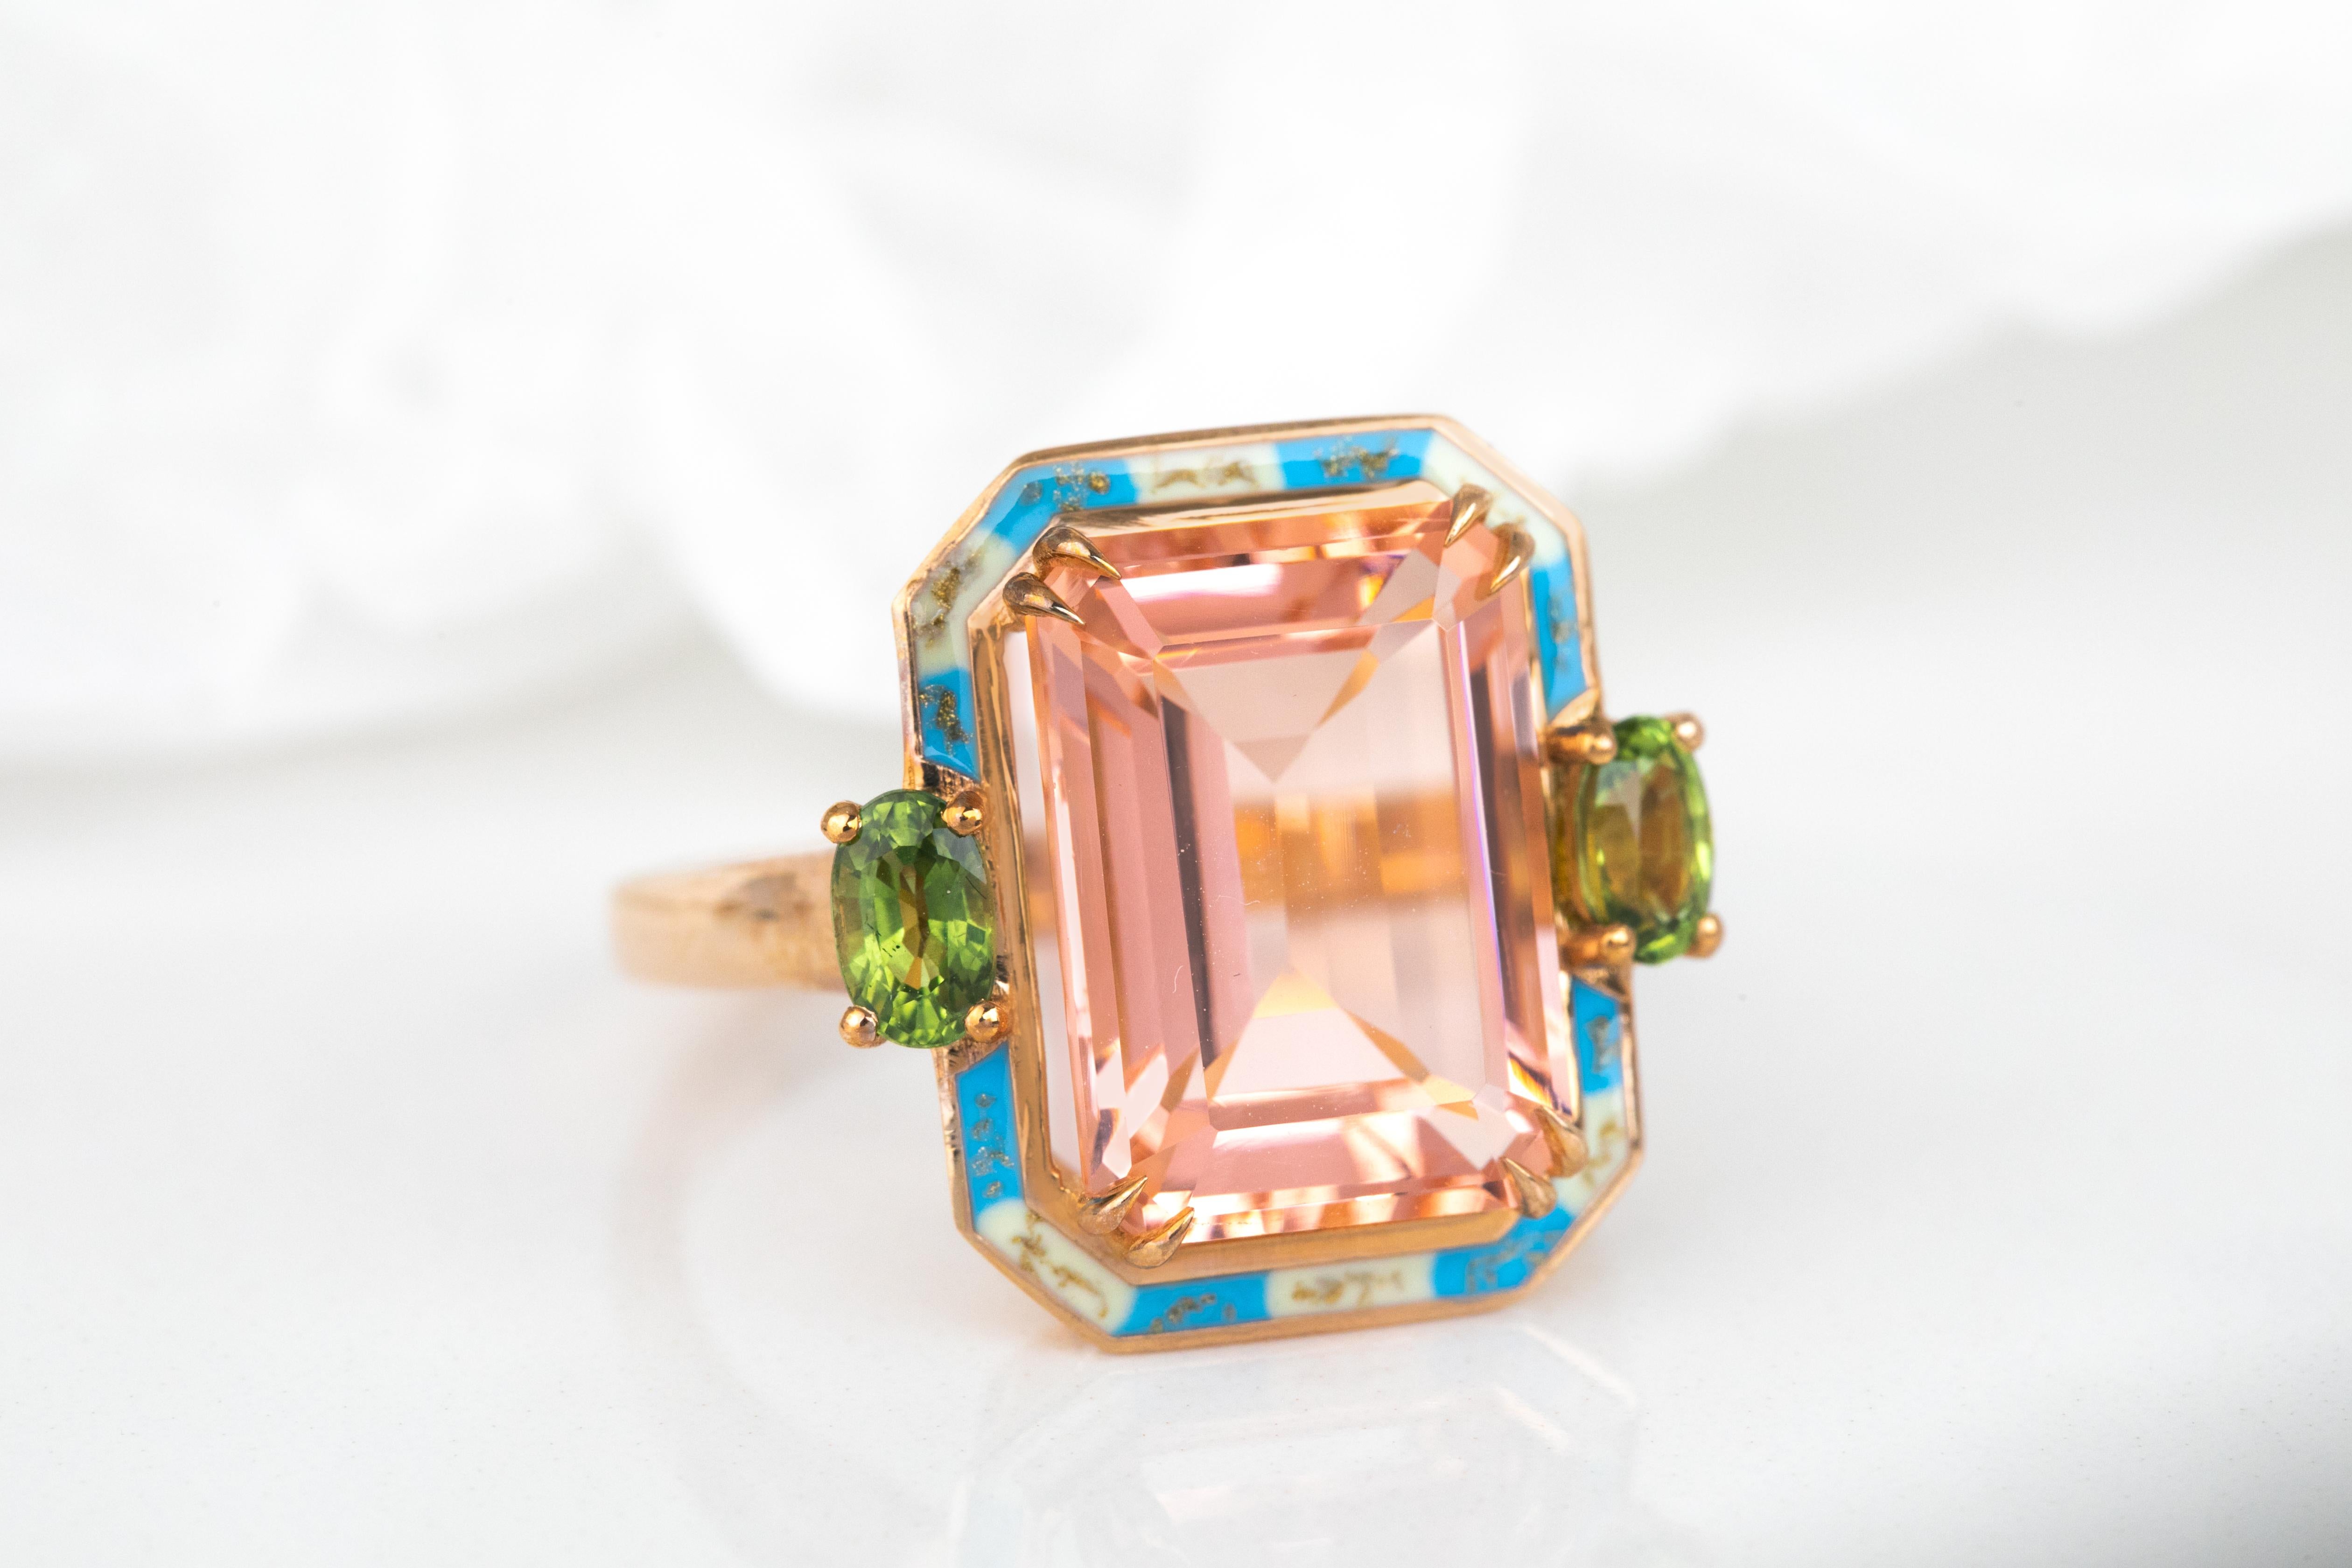 For Sale:  Art Deco Style Ring, 14k Gold Ring Pink Quartz and Pink Tourmaline Stone Ring 2